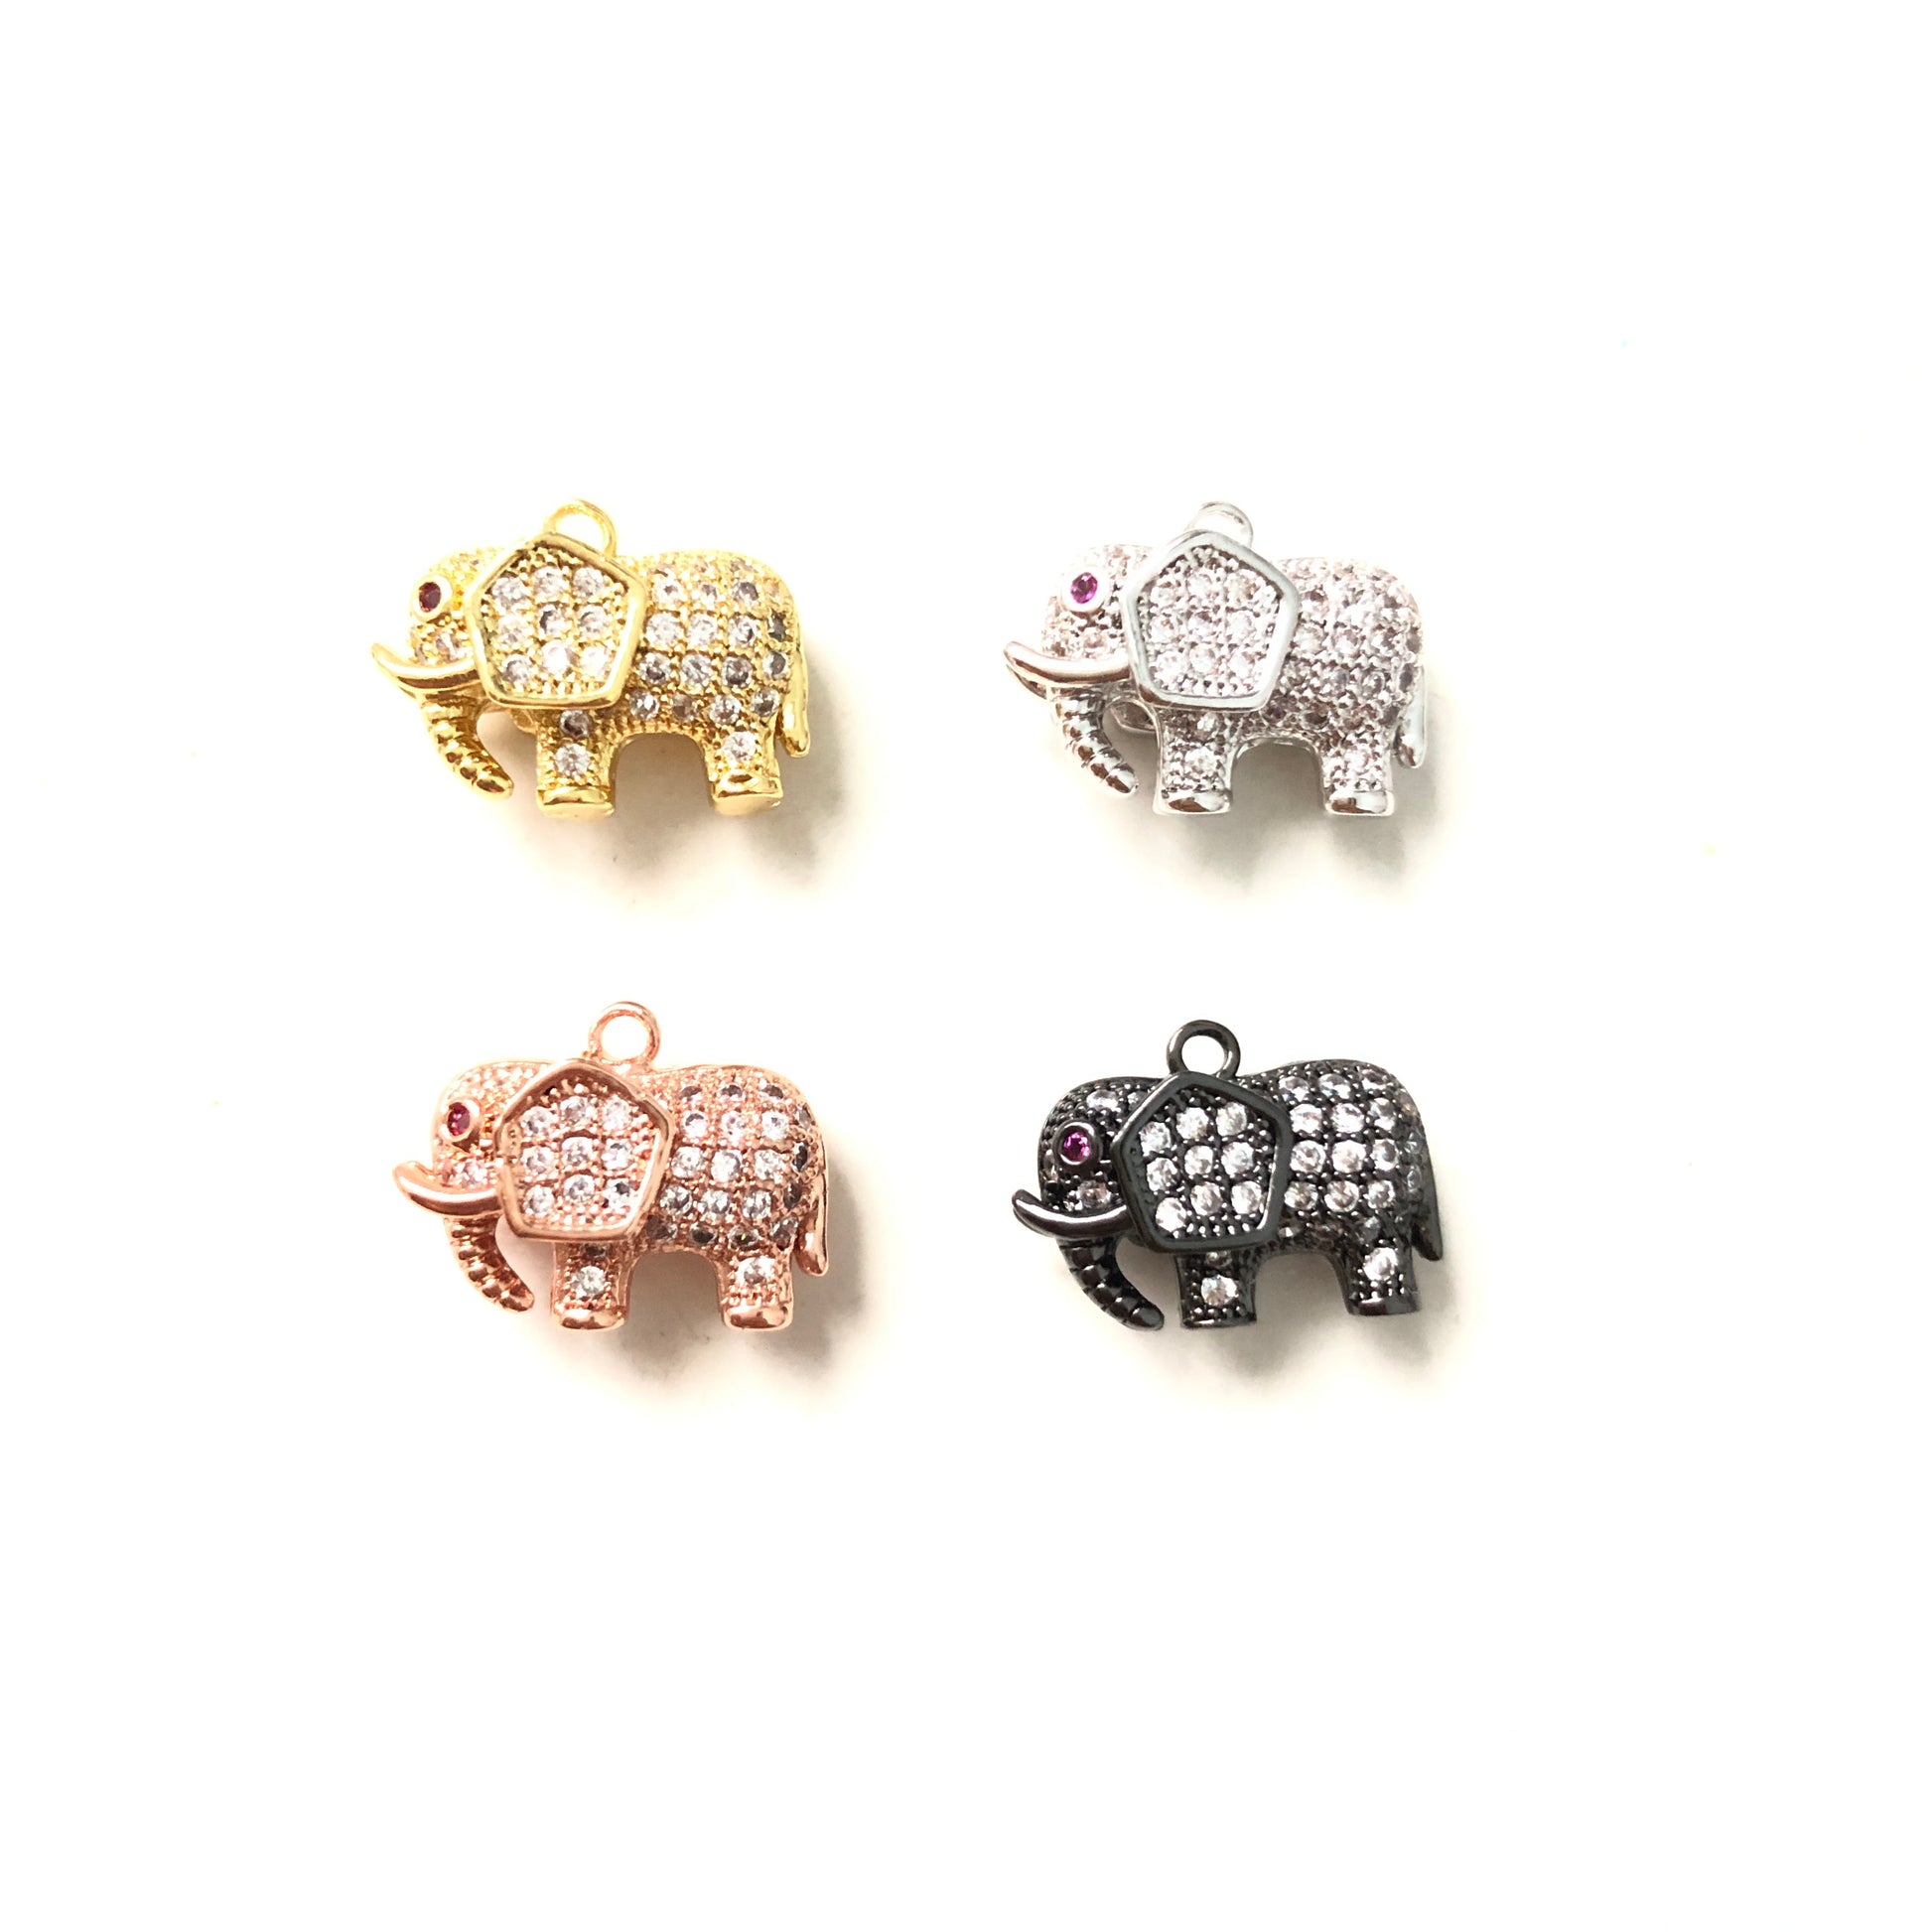 10pcs/lot 15*9mm CZ Paved Elephant Charms Mix Color CZ Paved Charms Animals & Insects Small Sizes Charms Beads Beyond